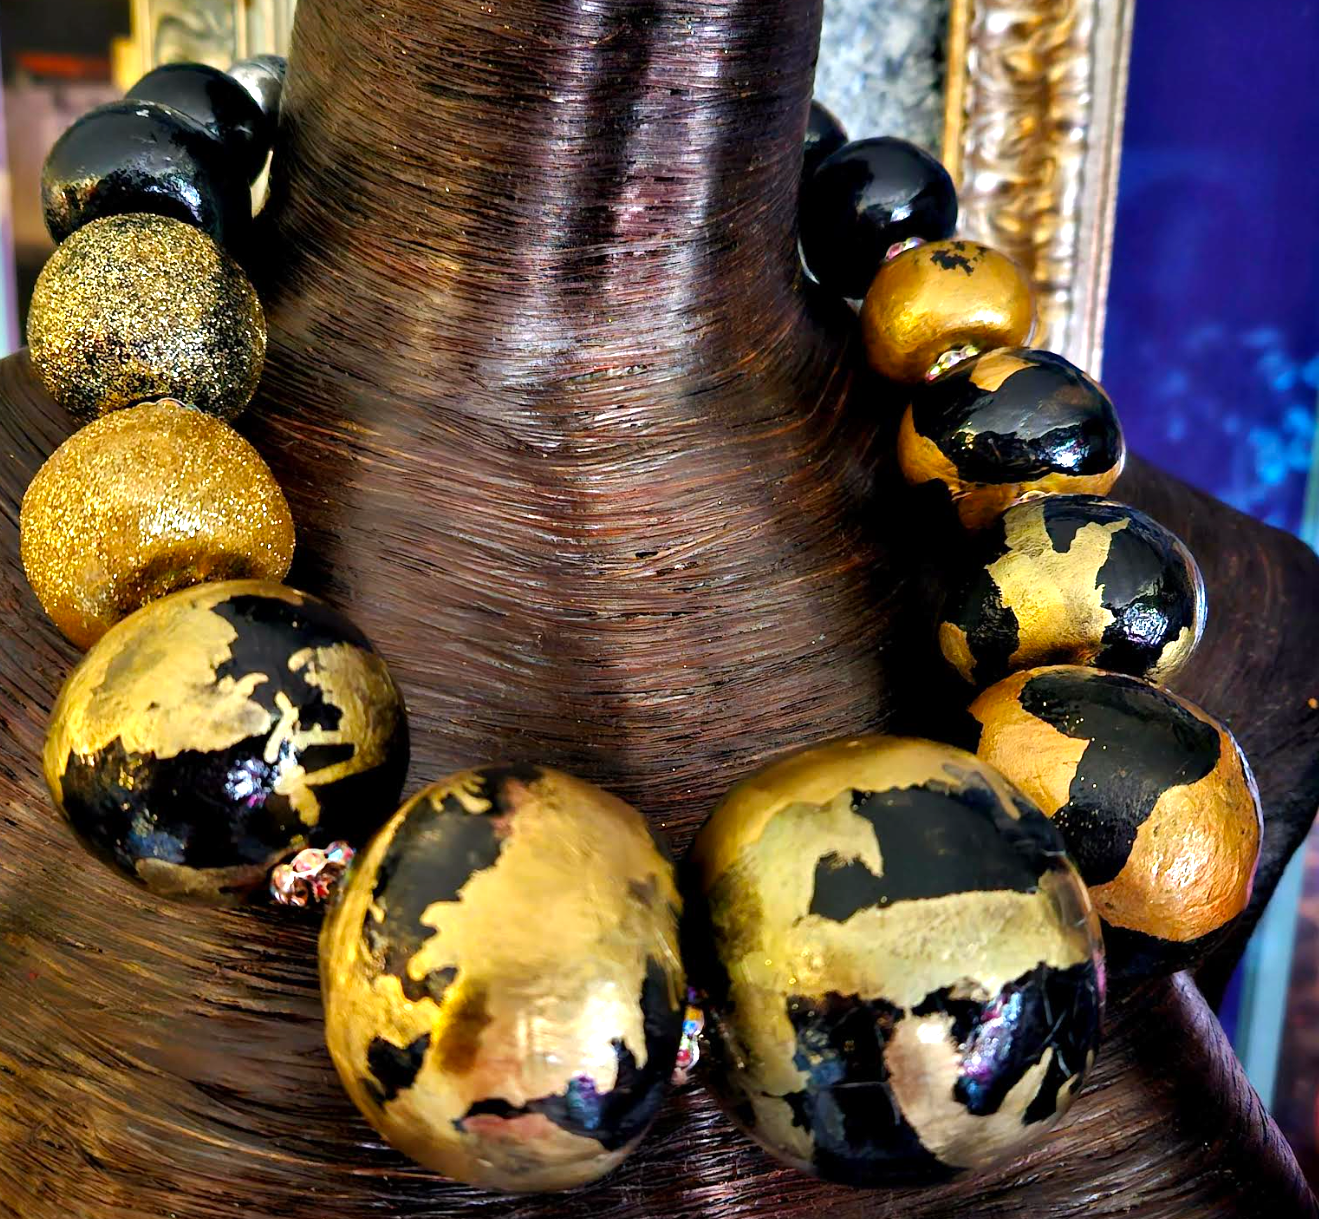 Necklace Beaded Massive Hand Sculpted Black Gold Women, Neck Candy Avant Garde Oversized Orbs, Jewelry Runway Ready Rich Post